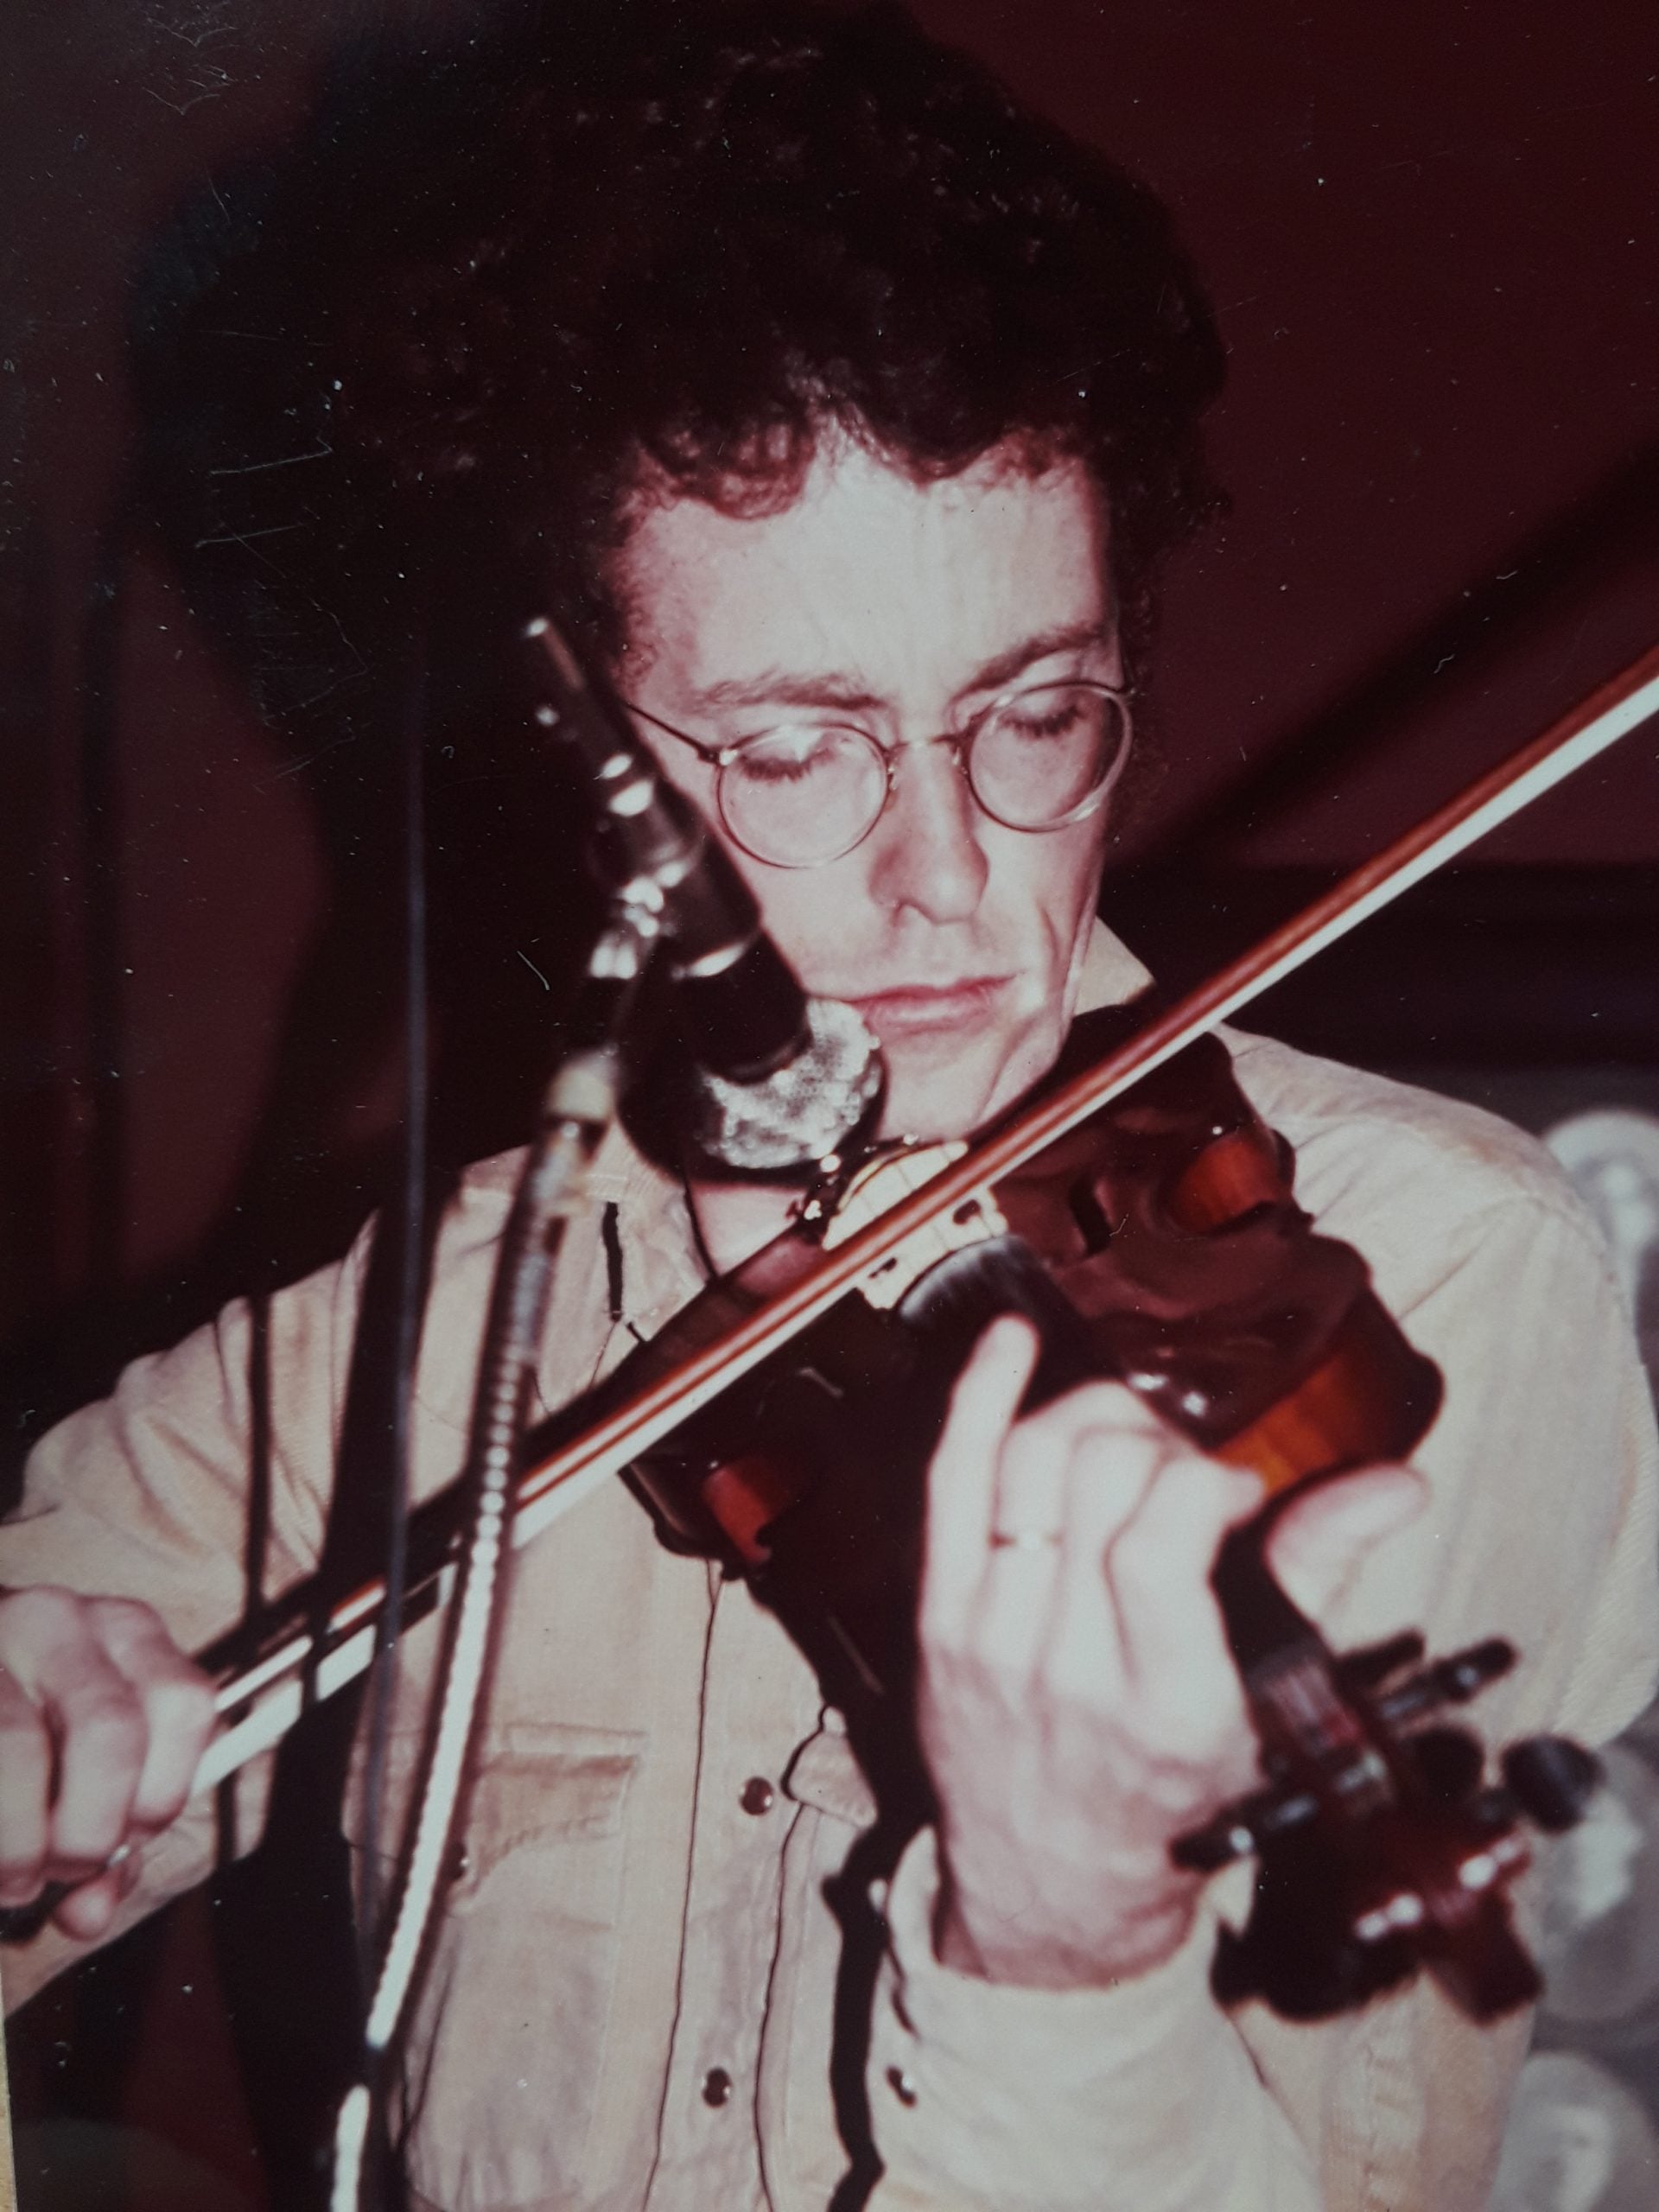 Greg playing Big Red in 1980